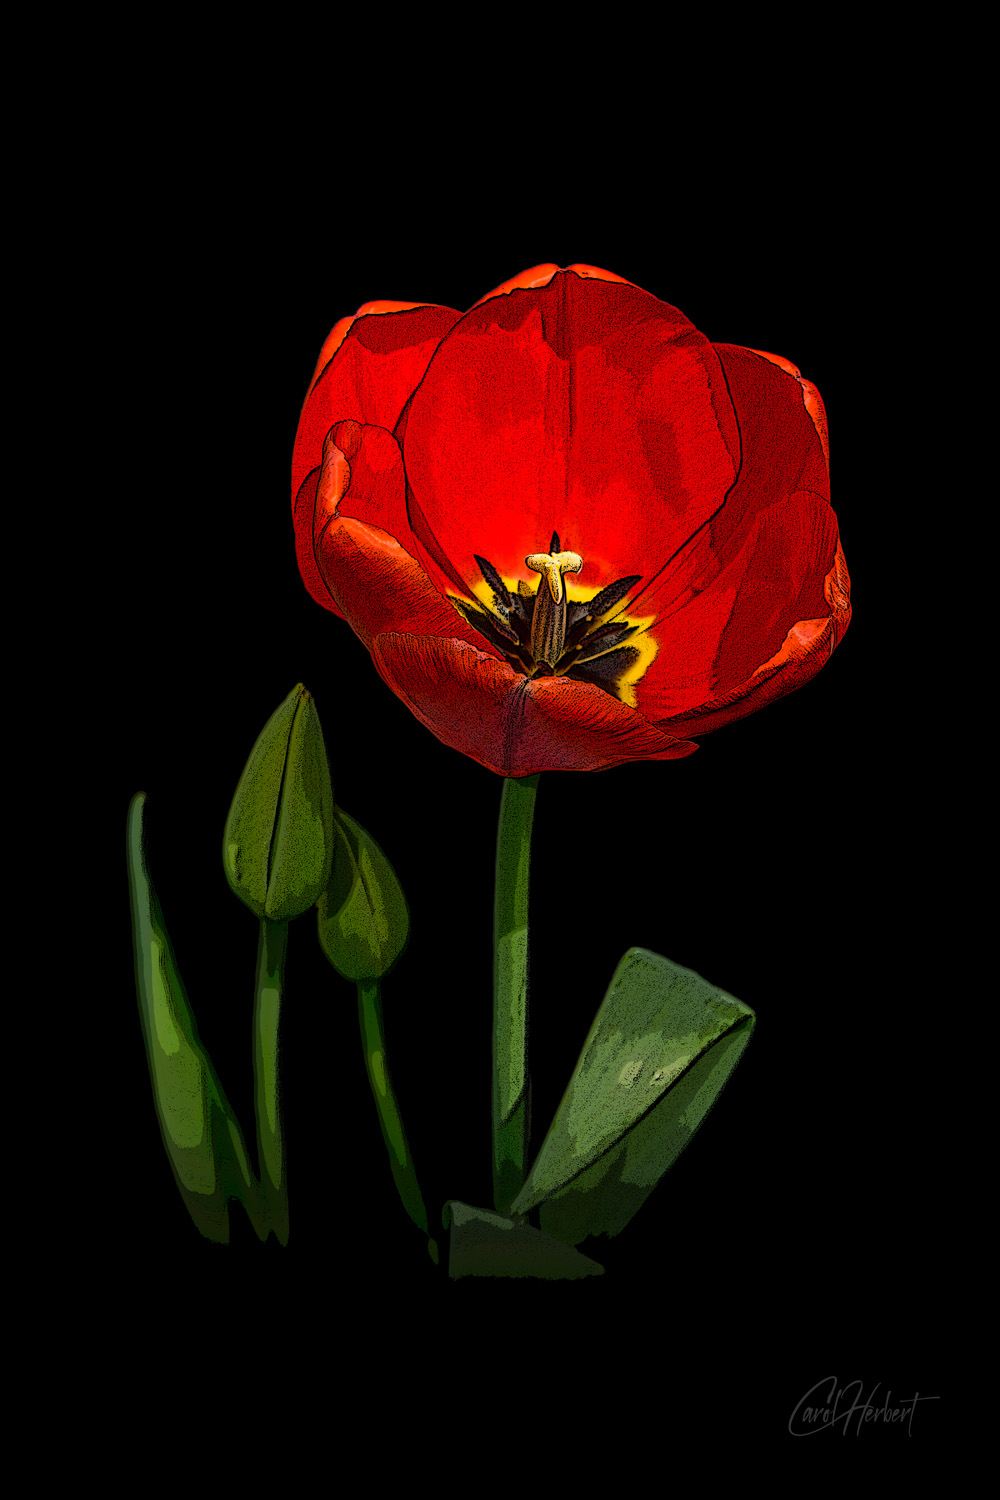 A single red tulip on a black background in a pop art style